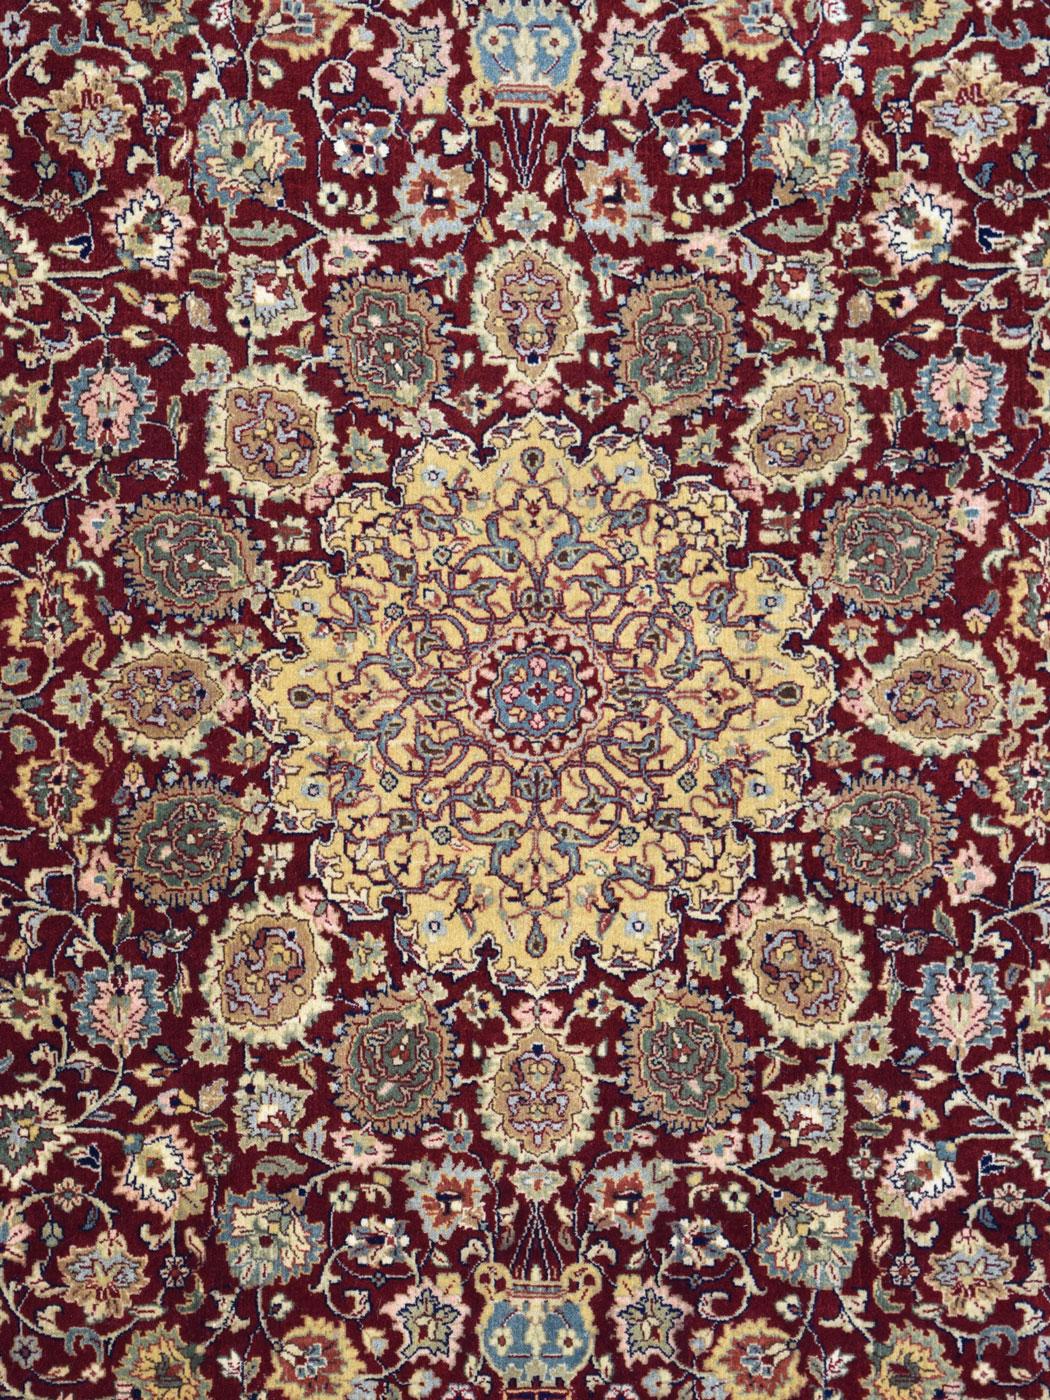 Inspired by classic and antique Persian Tabriz carpets, this maroon and gold Tabriz carpet measures 4’7” x 6’9” and is in brand-new condition. Entirely hand-knotted, this carpet features a stunning 16-pointed medallion and has a formal butterfly and